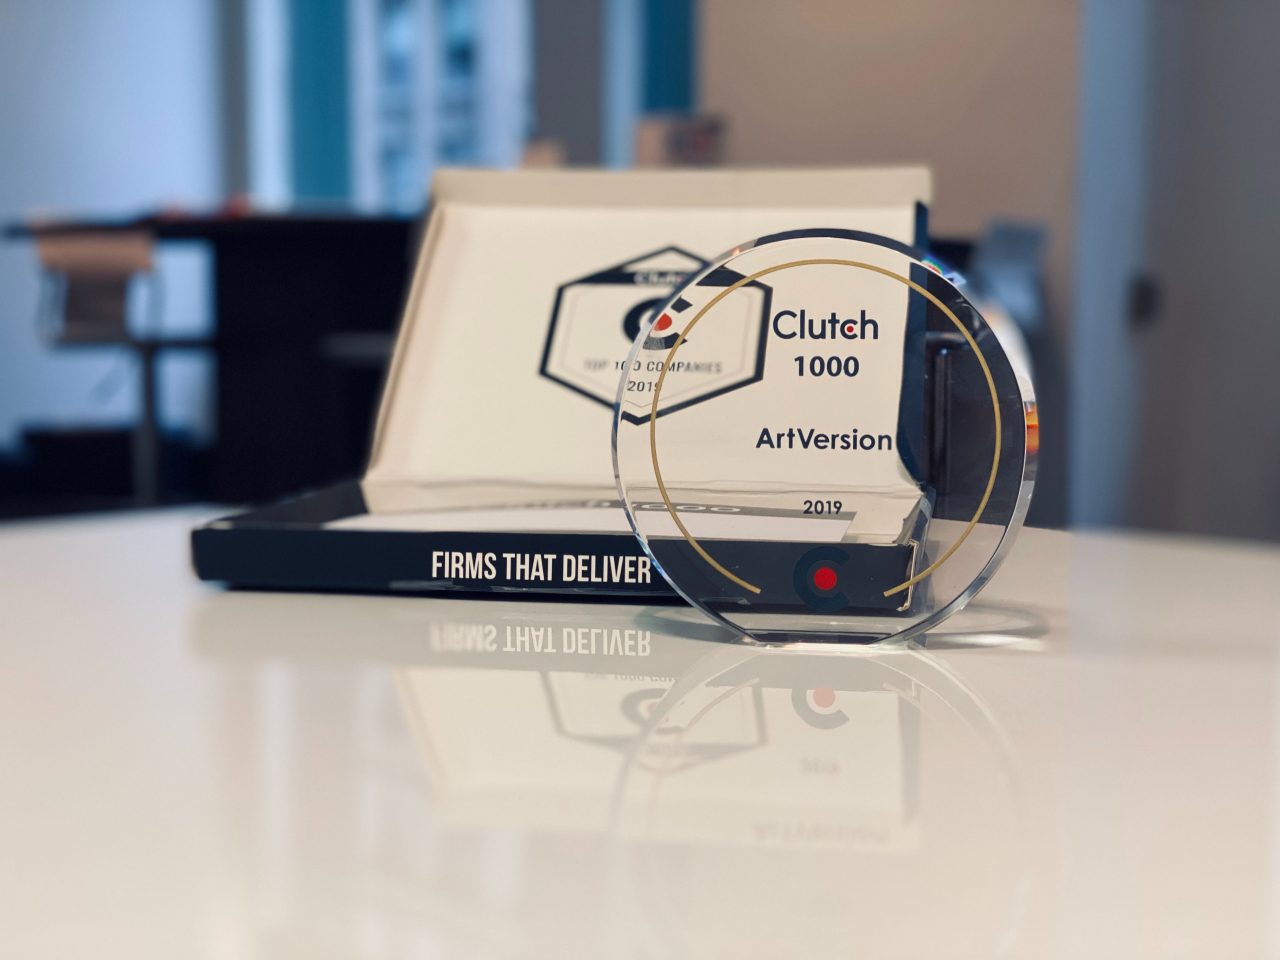 ArtVersion recognized as leading B2B service provider by Clutch.co